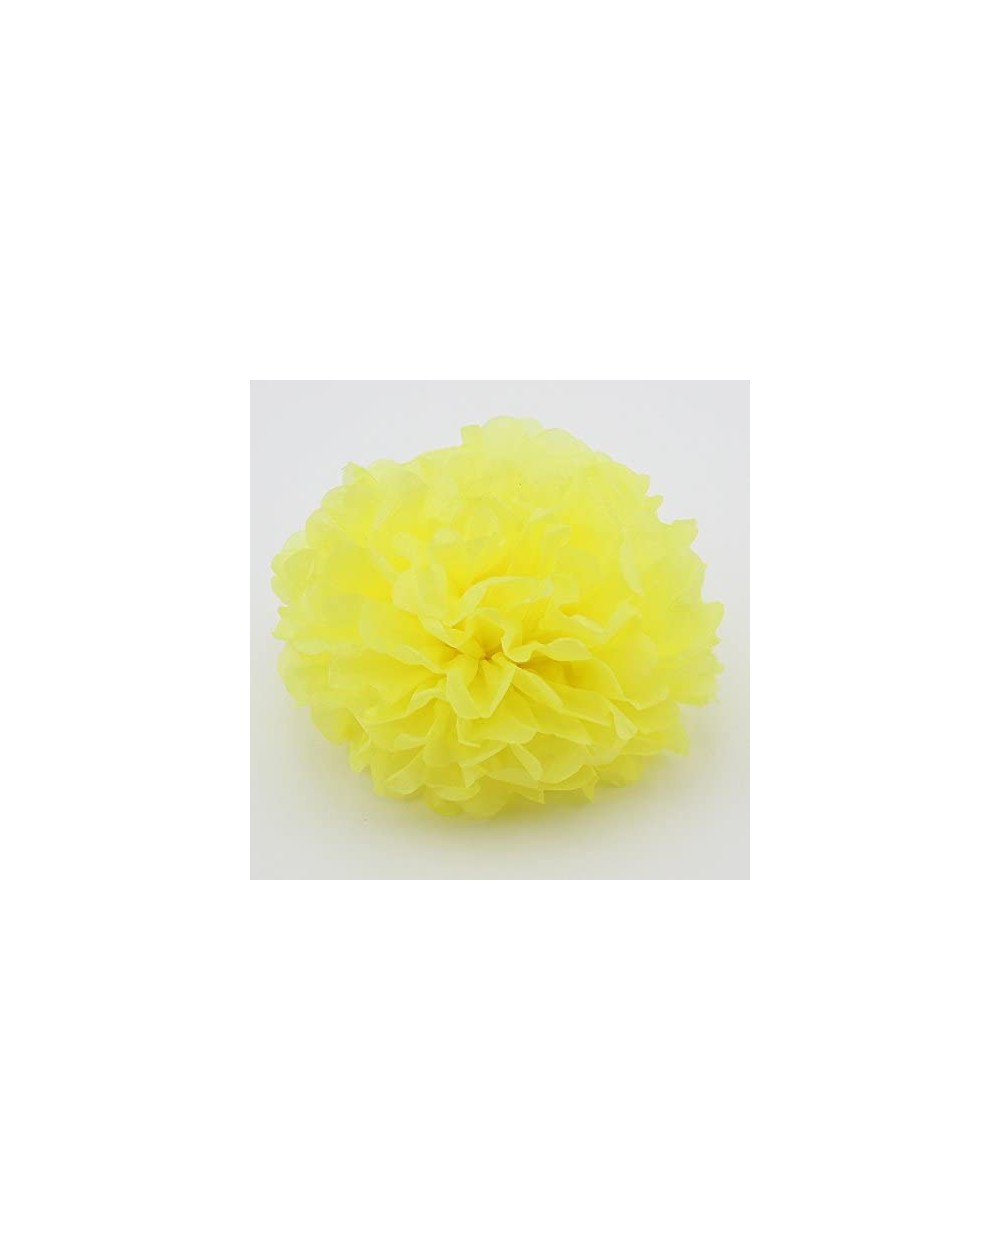 Tissue Pom Poms Since10 Pack 10 Inch Tissue Paper Flowers-Tissue Pom Poms Decor-Tissue Paper Pom Poms-Christmas Wedding Party...